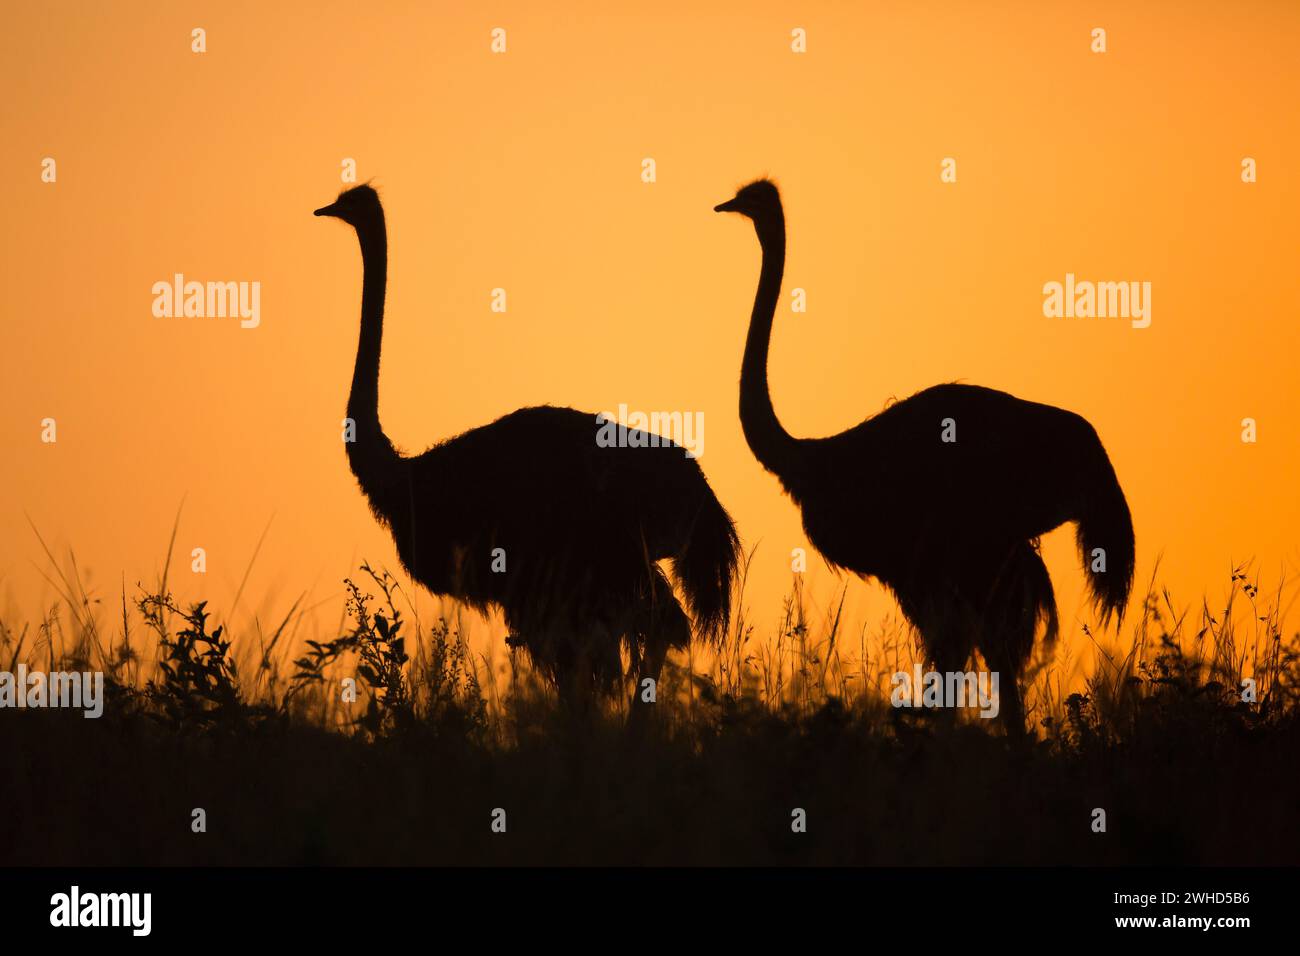 animal Themes, animals in the wild, beauty in nature, bird, bush, daytime, no people, orange background, Ostrich (Struthio camelus), outdoors, silhouette, two animals, copy space, nature, nature reserve, safari, tourism, wildlife, abstract, South Africa, Africa, Gauteng Province, dawn Stock Photo